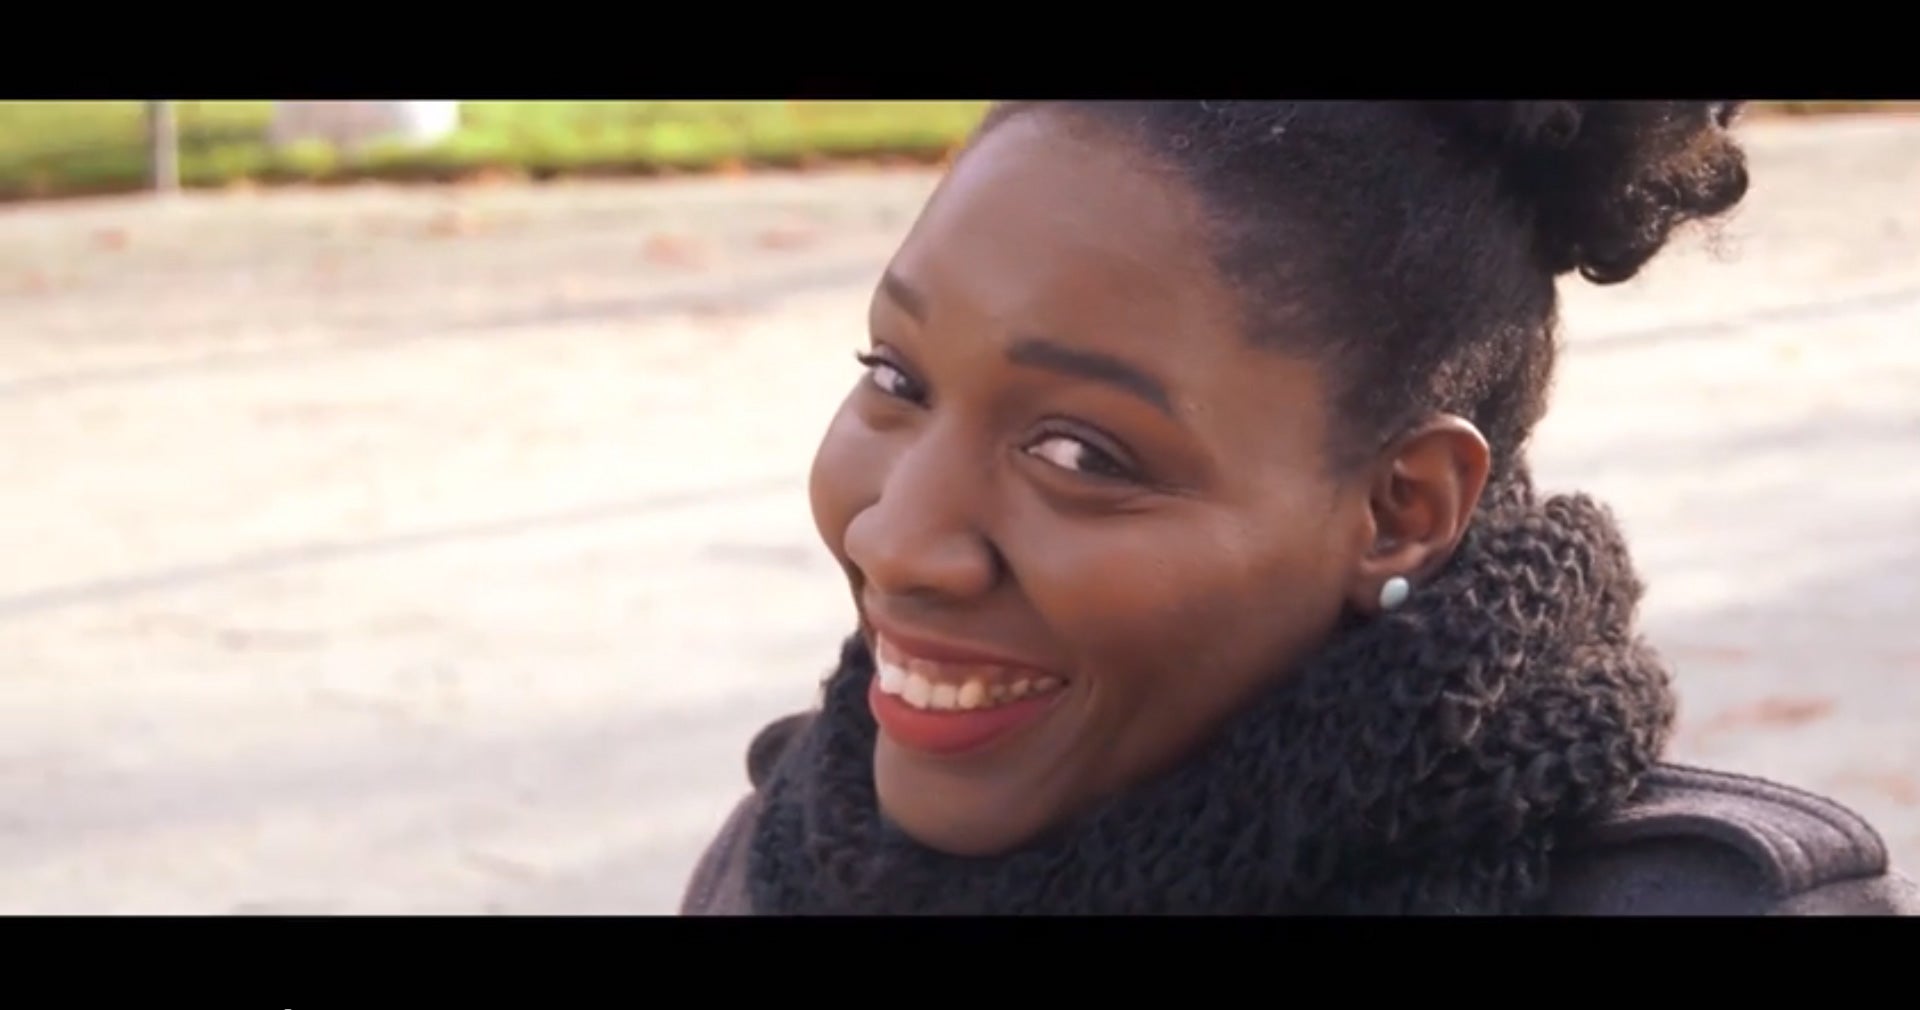 'Pretty' Documentary Takes a Look at Black Beauty Around the World